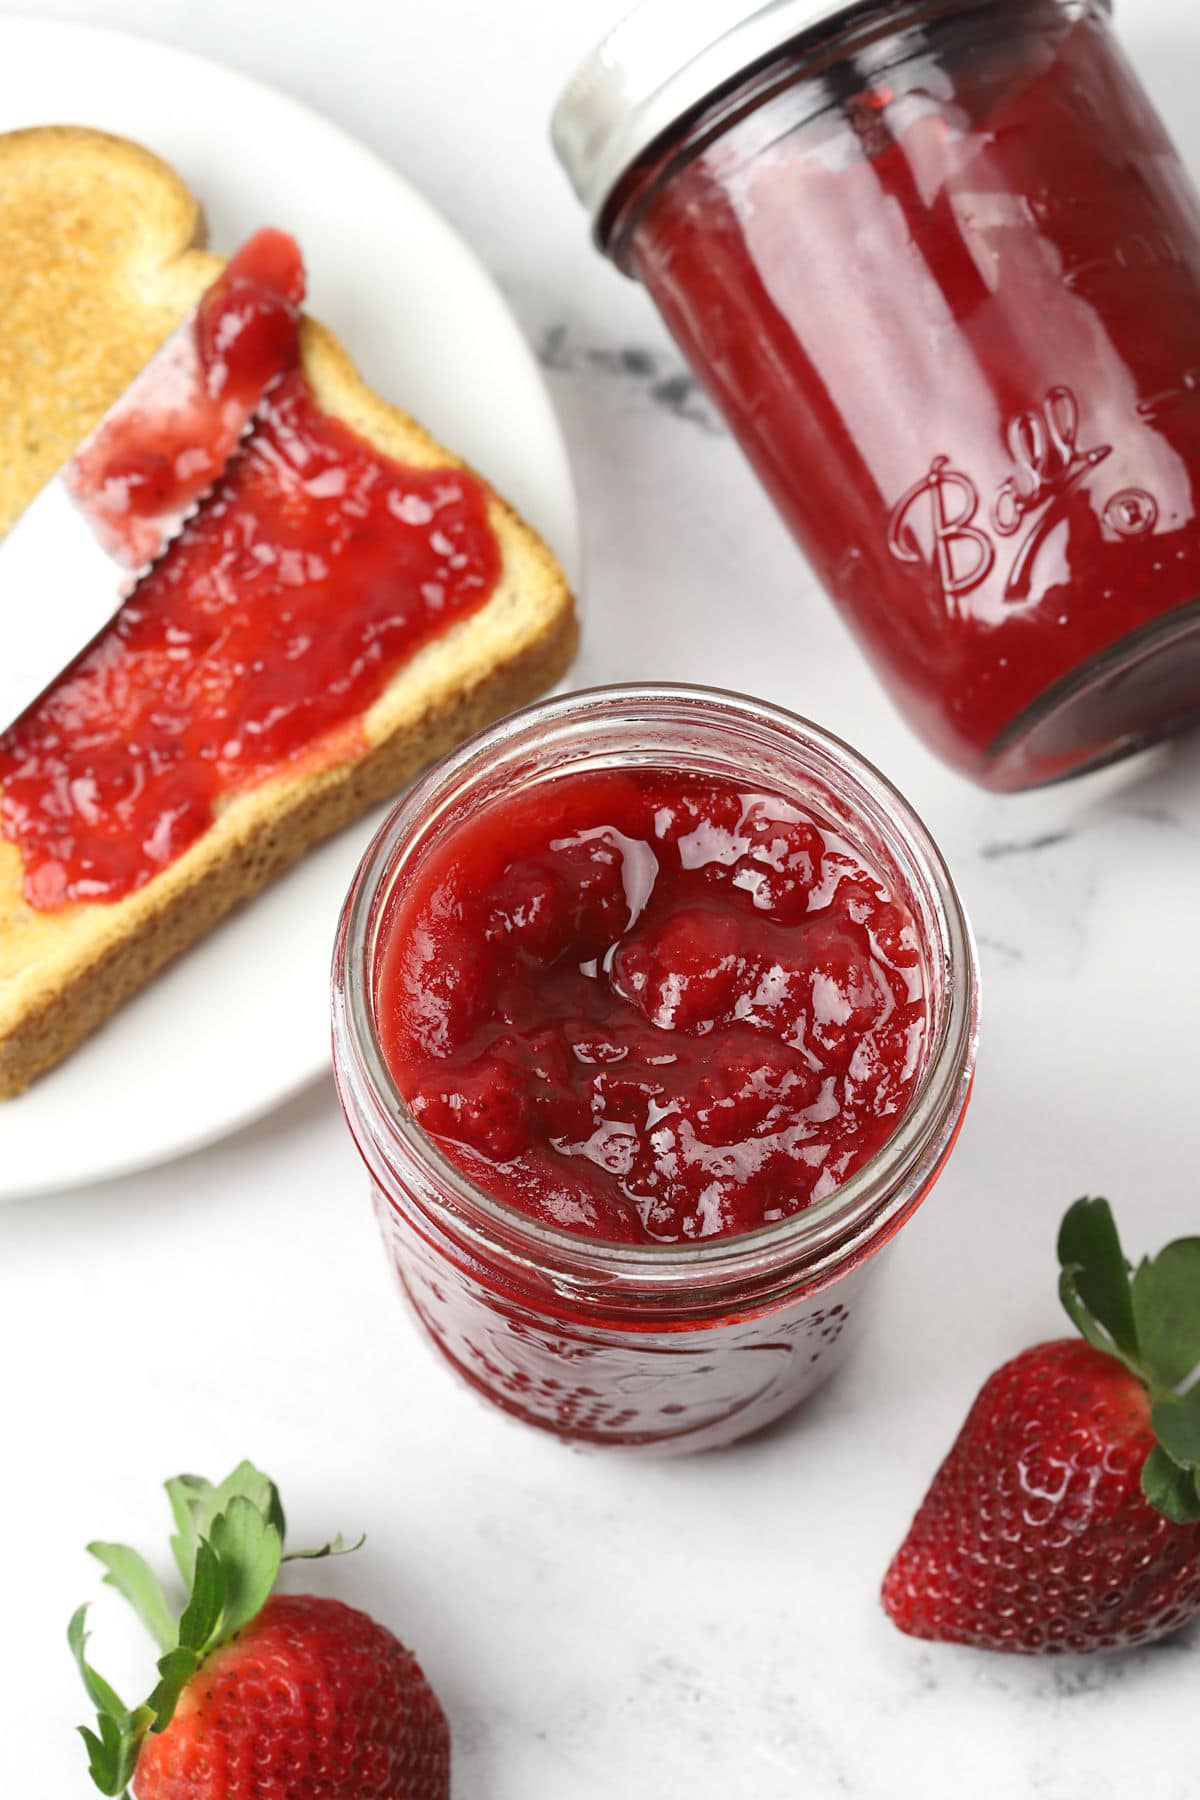 A jar of opened strawberry jam with a piece of toast on a plate.